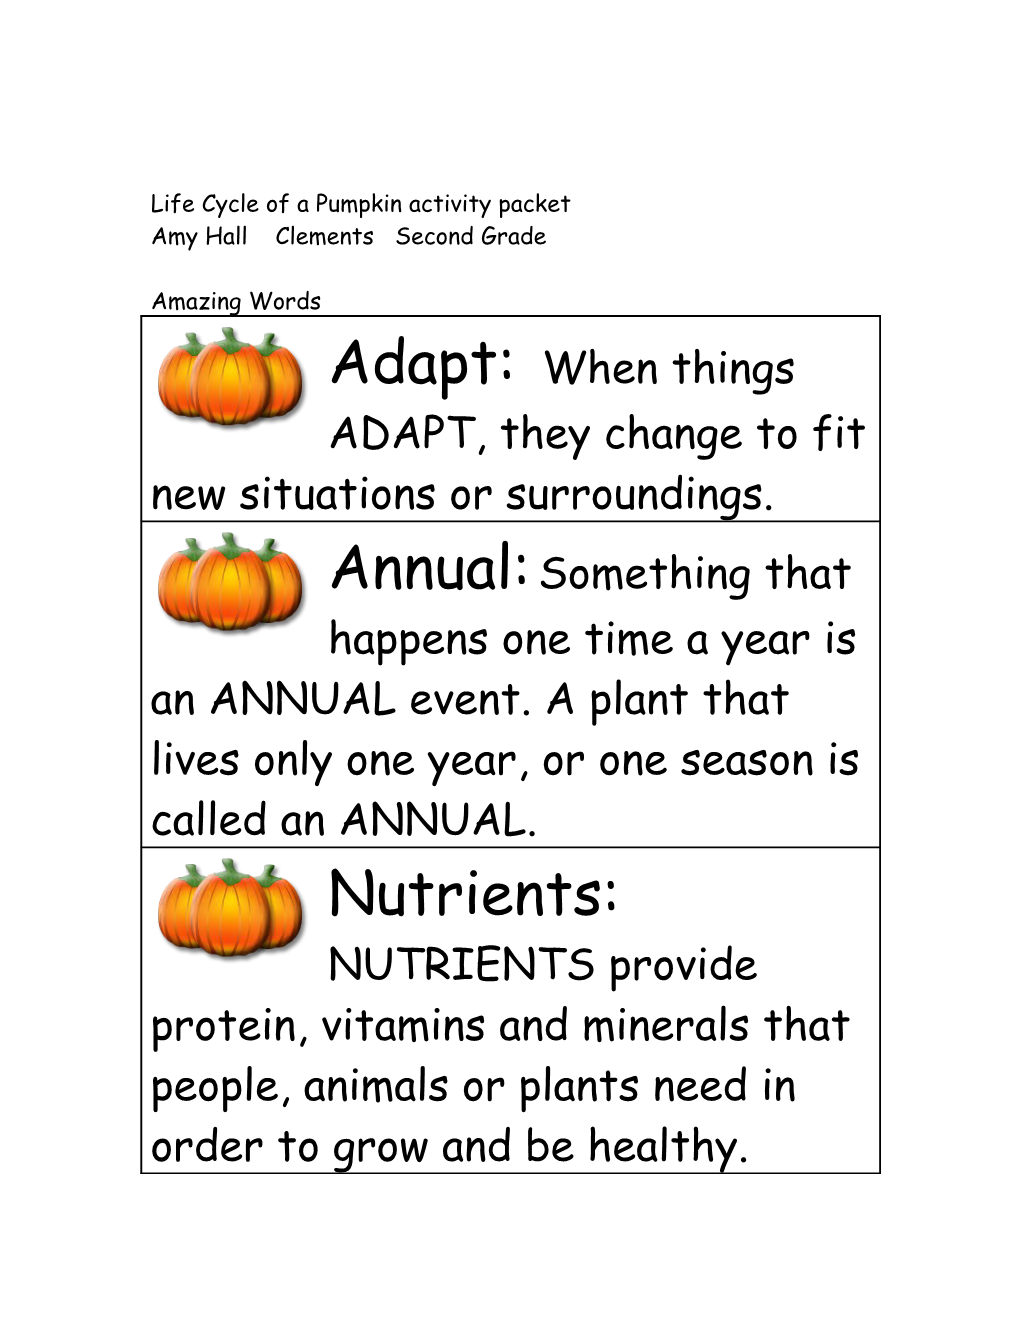 Life Cycle of a Pumpkin Activity Packet